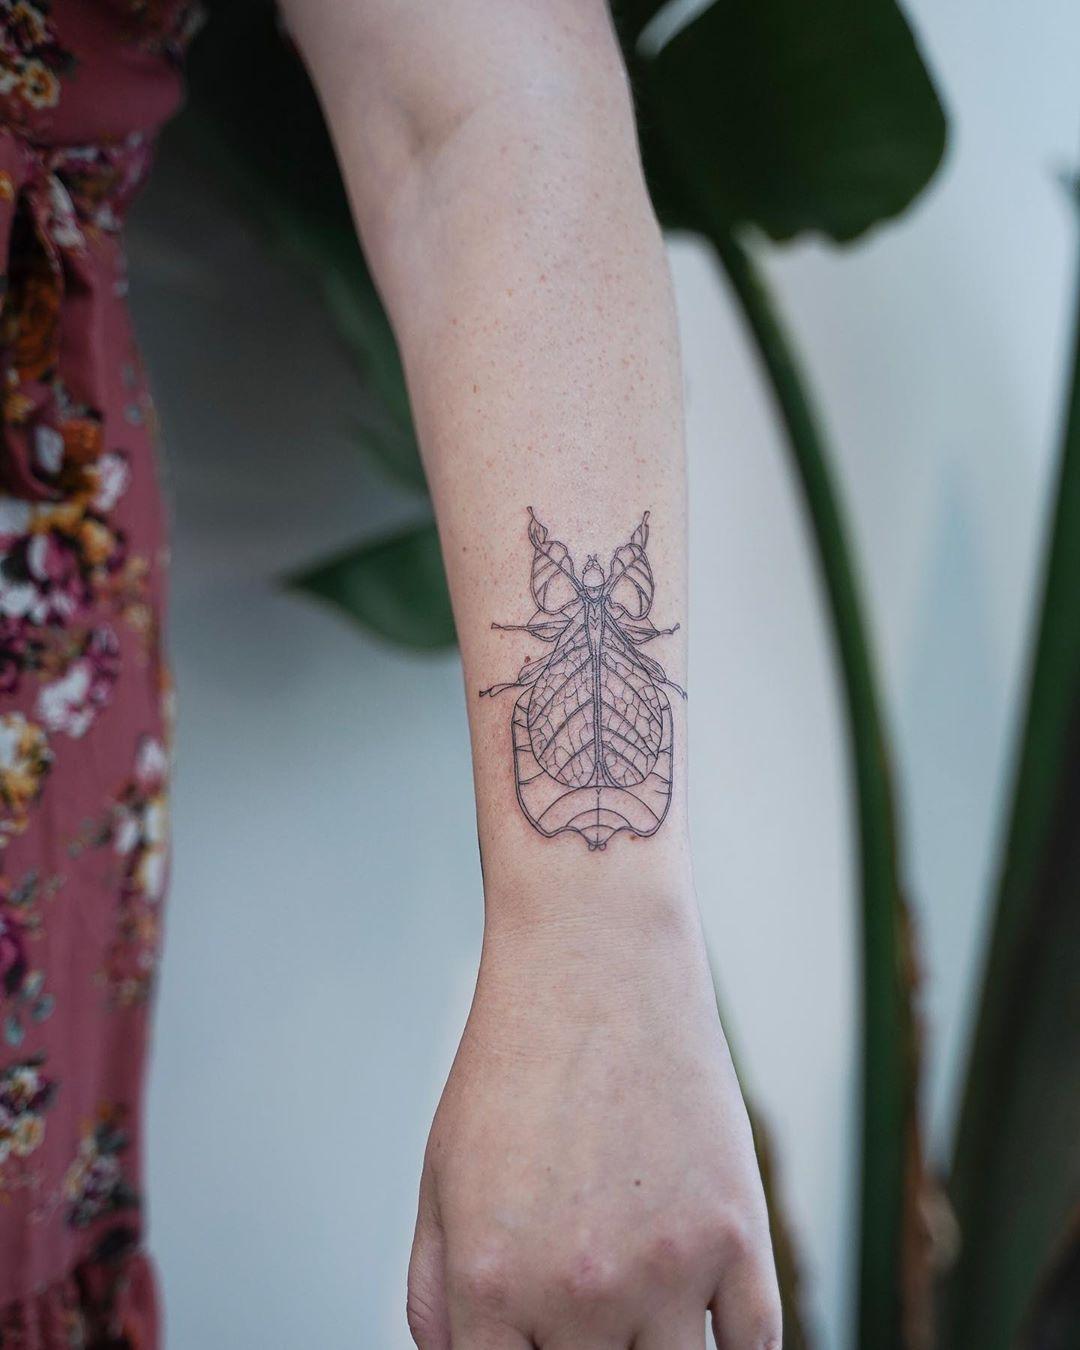 A leaf insect tattoo by @firstjing